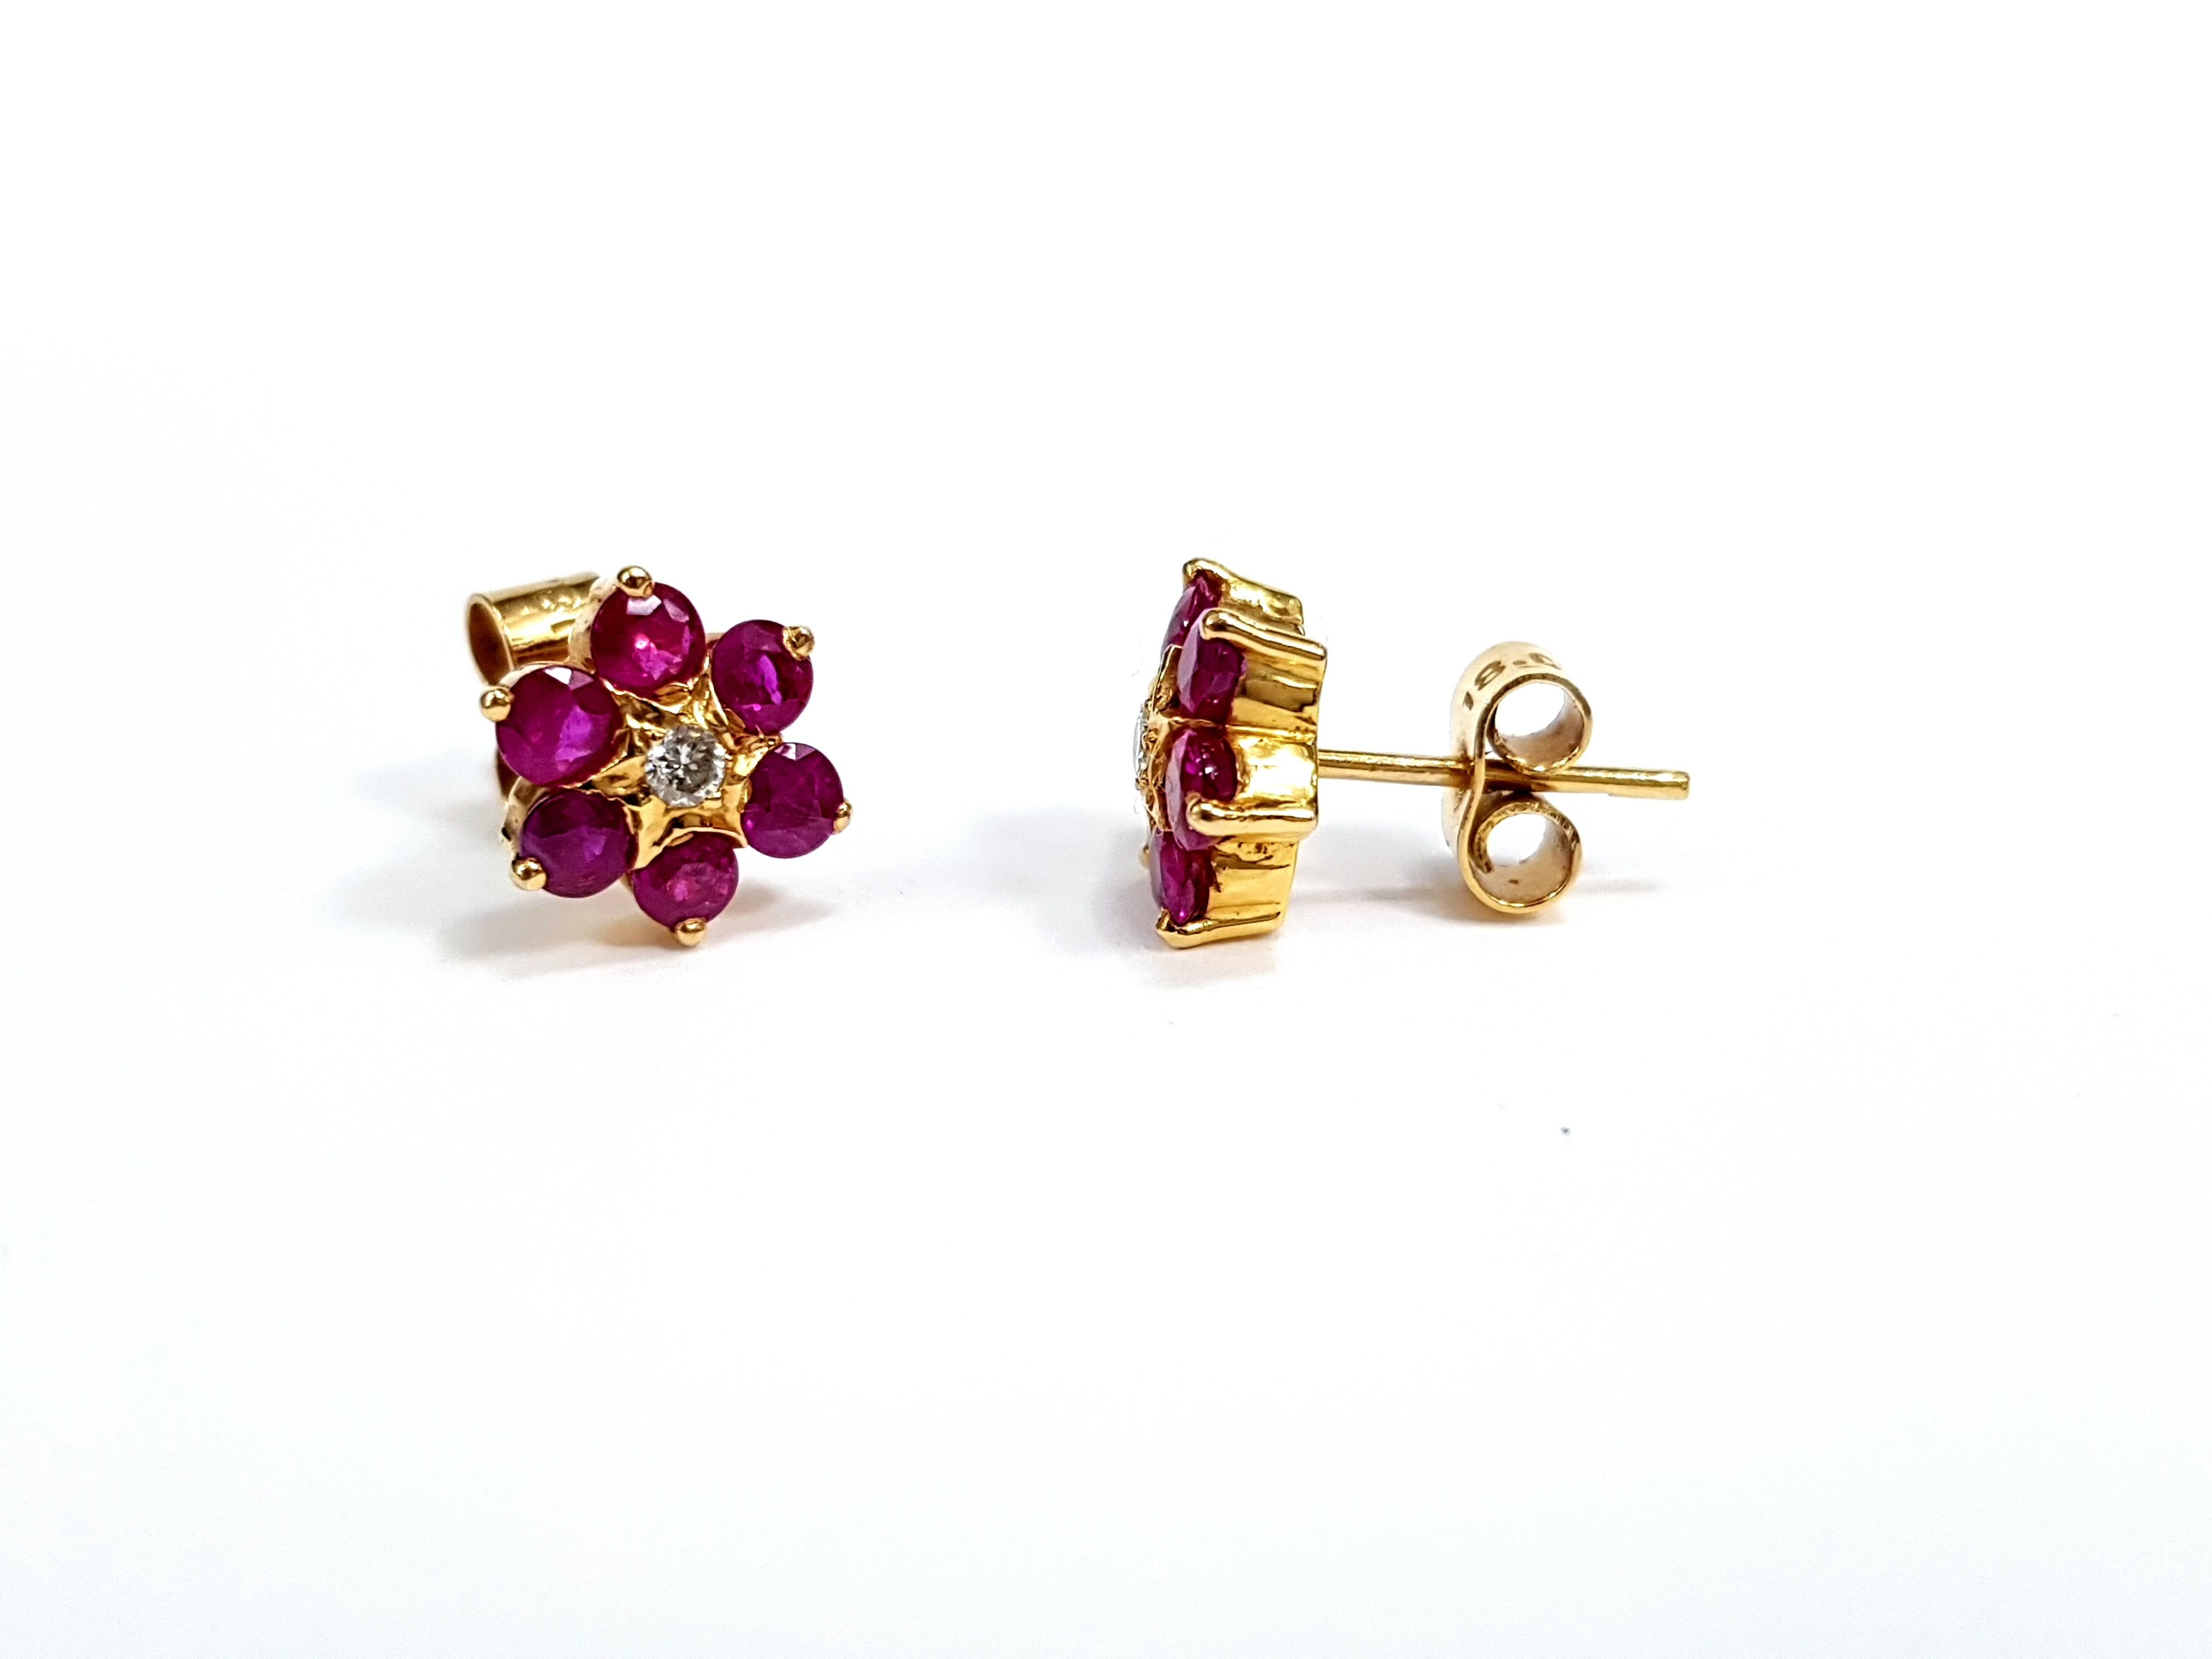 Diamond Ruby hand made daisy flower 18 Karat yellow gold cluster Artisan stud earrings.
An exquisite ruby and diamond earrings, set in 18 karat yellow gold handmade cluster. Each has a center diamond surrounded by six beautiful pinkish red Rubies in